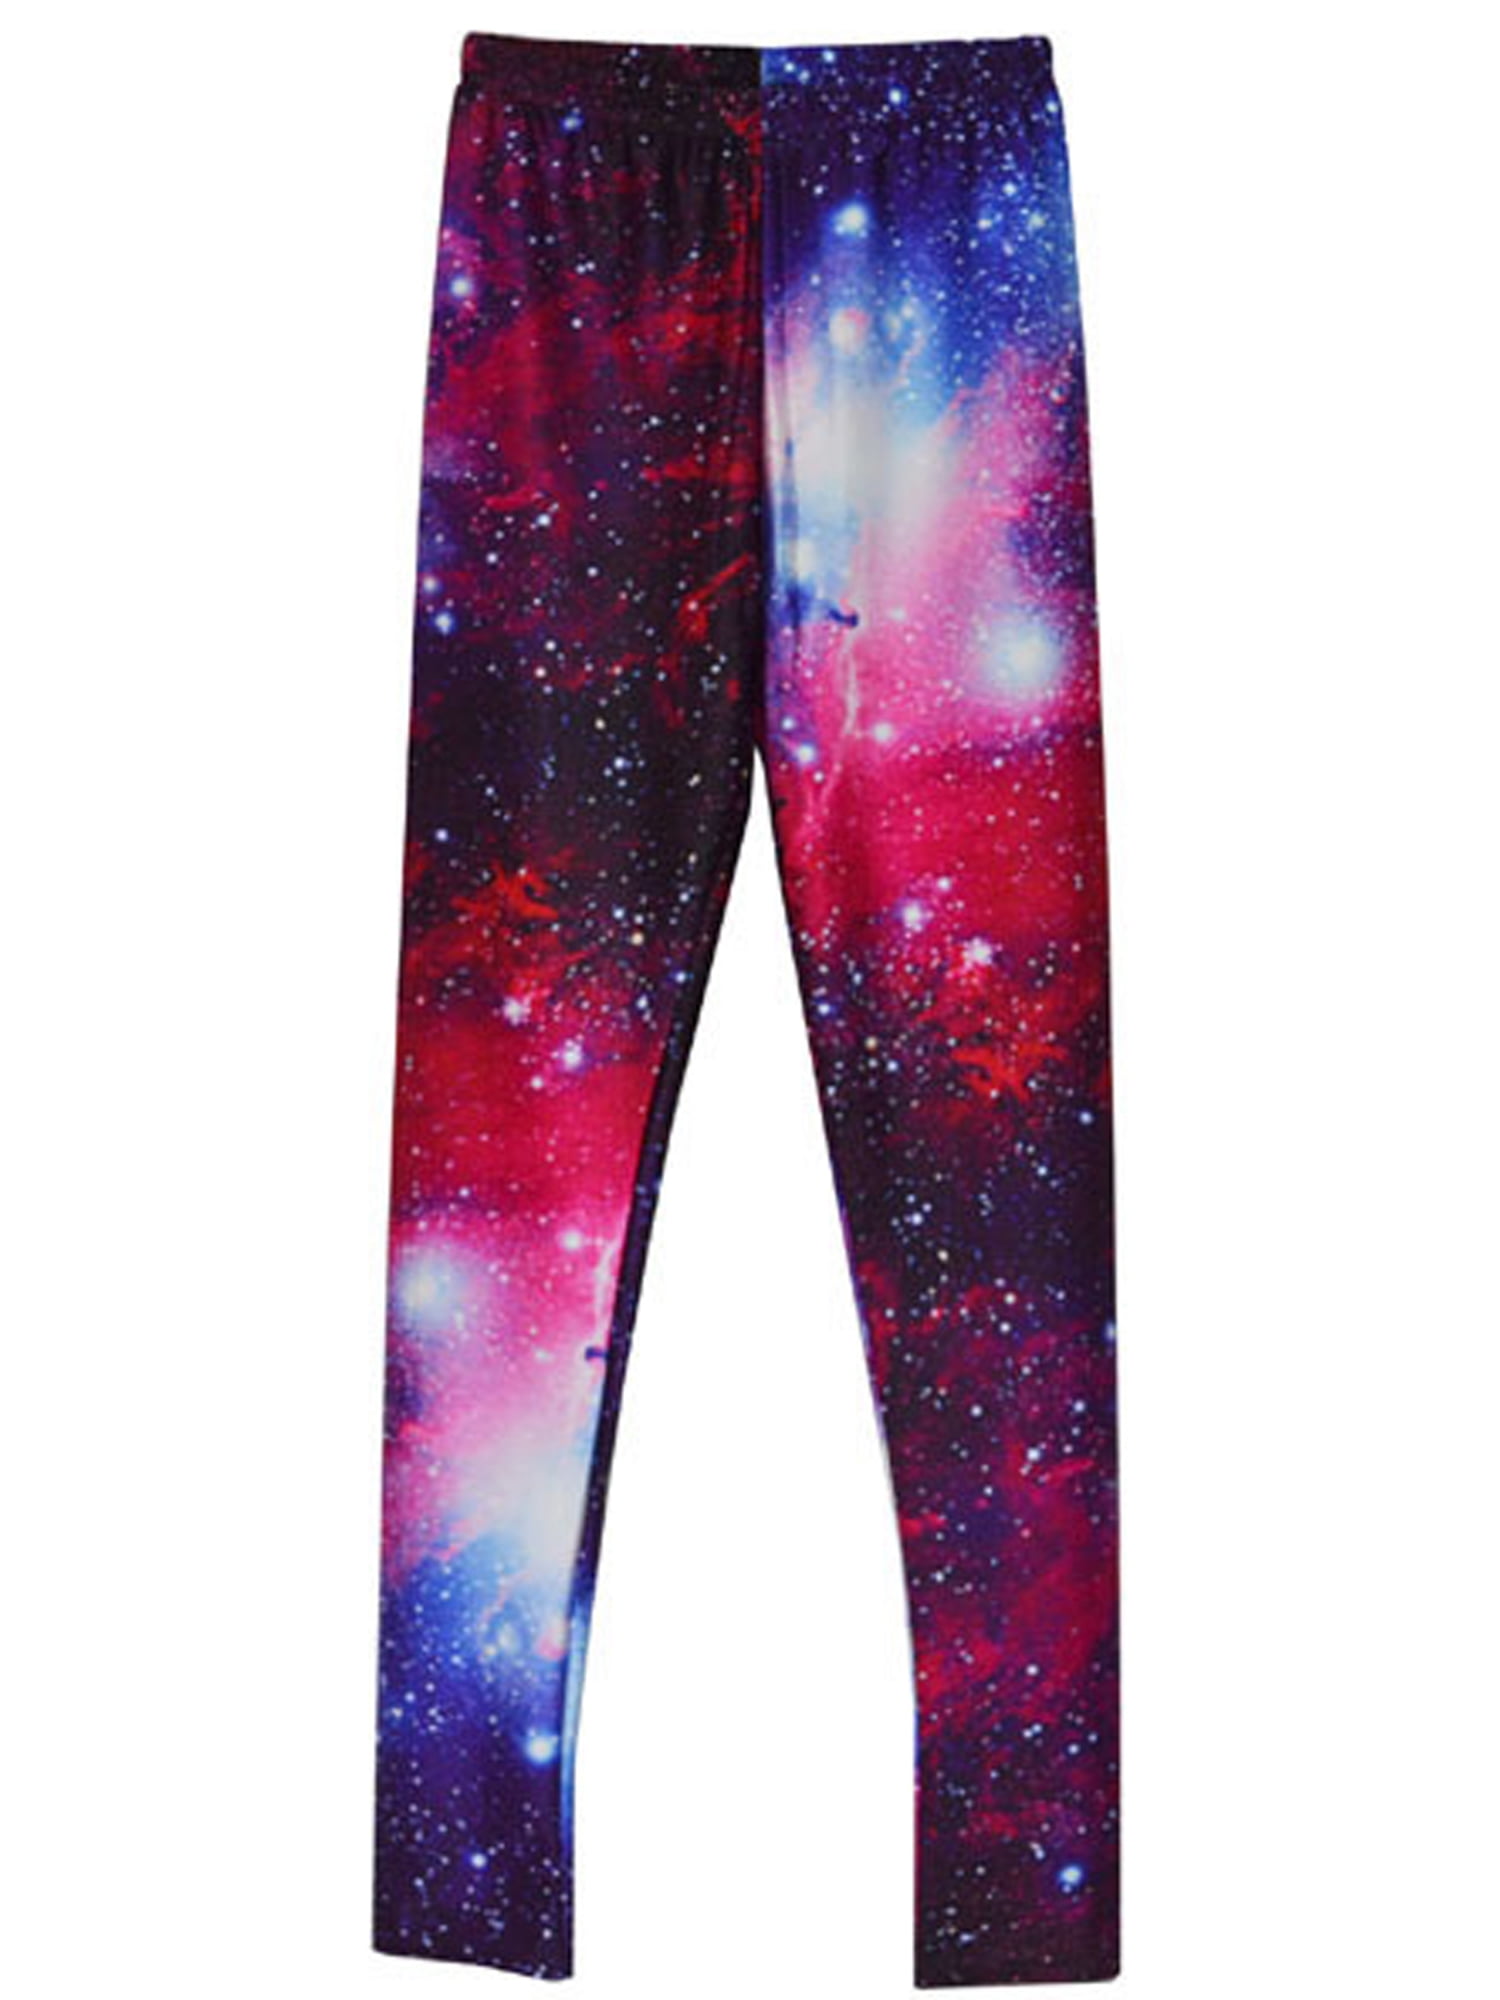 Galaxy Print Leggings for Women: Free Global Shipping ⋆ Stardust Central